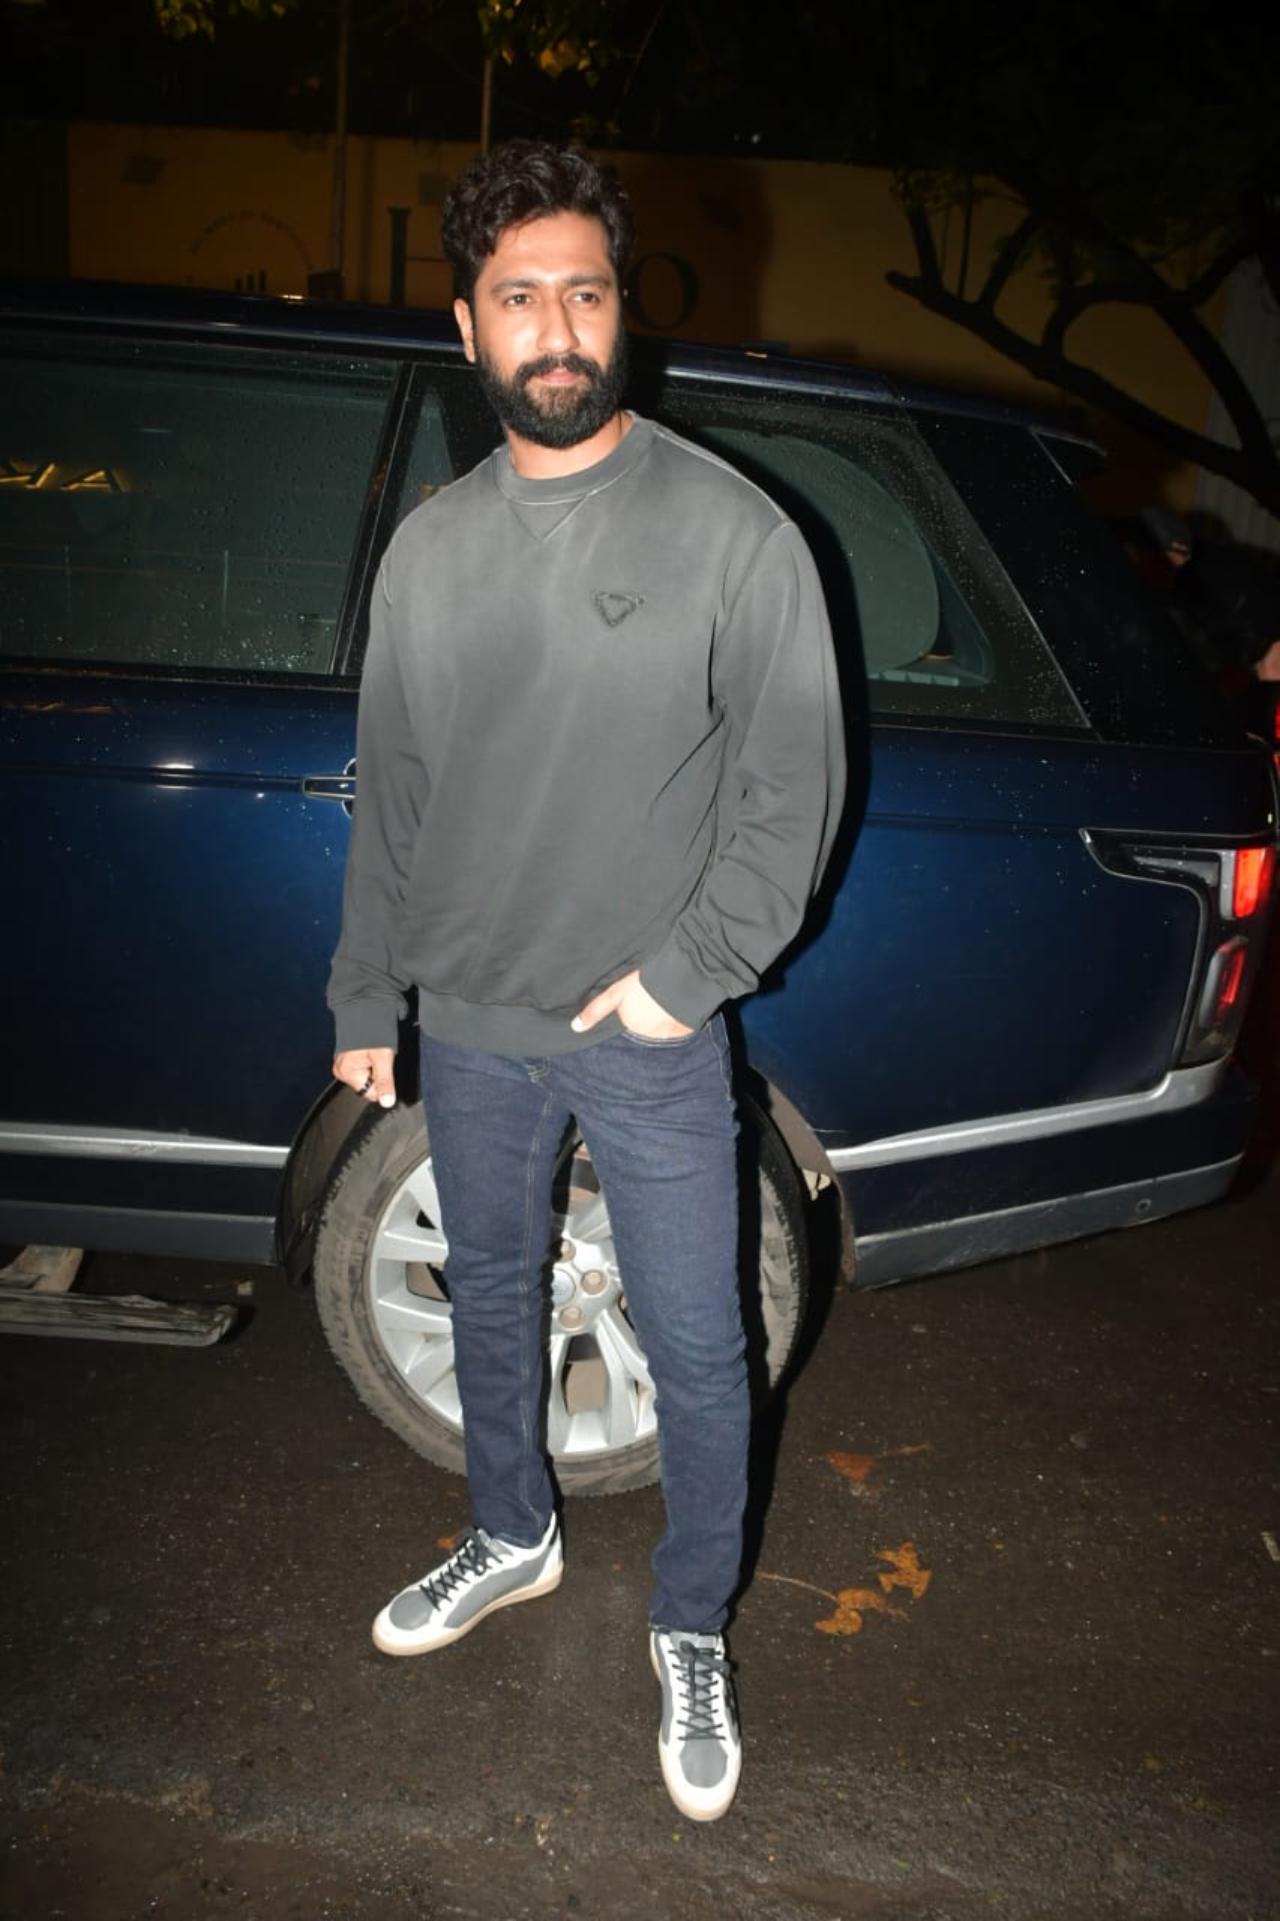 Man of the hour, Vicky Kaushal looked cool in a grey sweatshirt and jeans